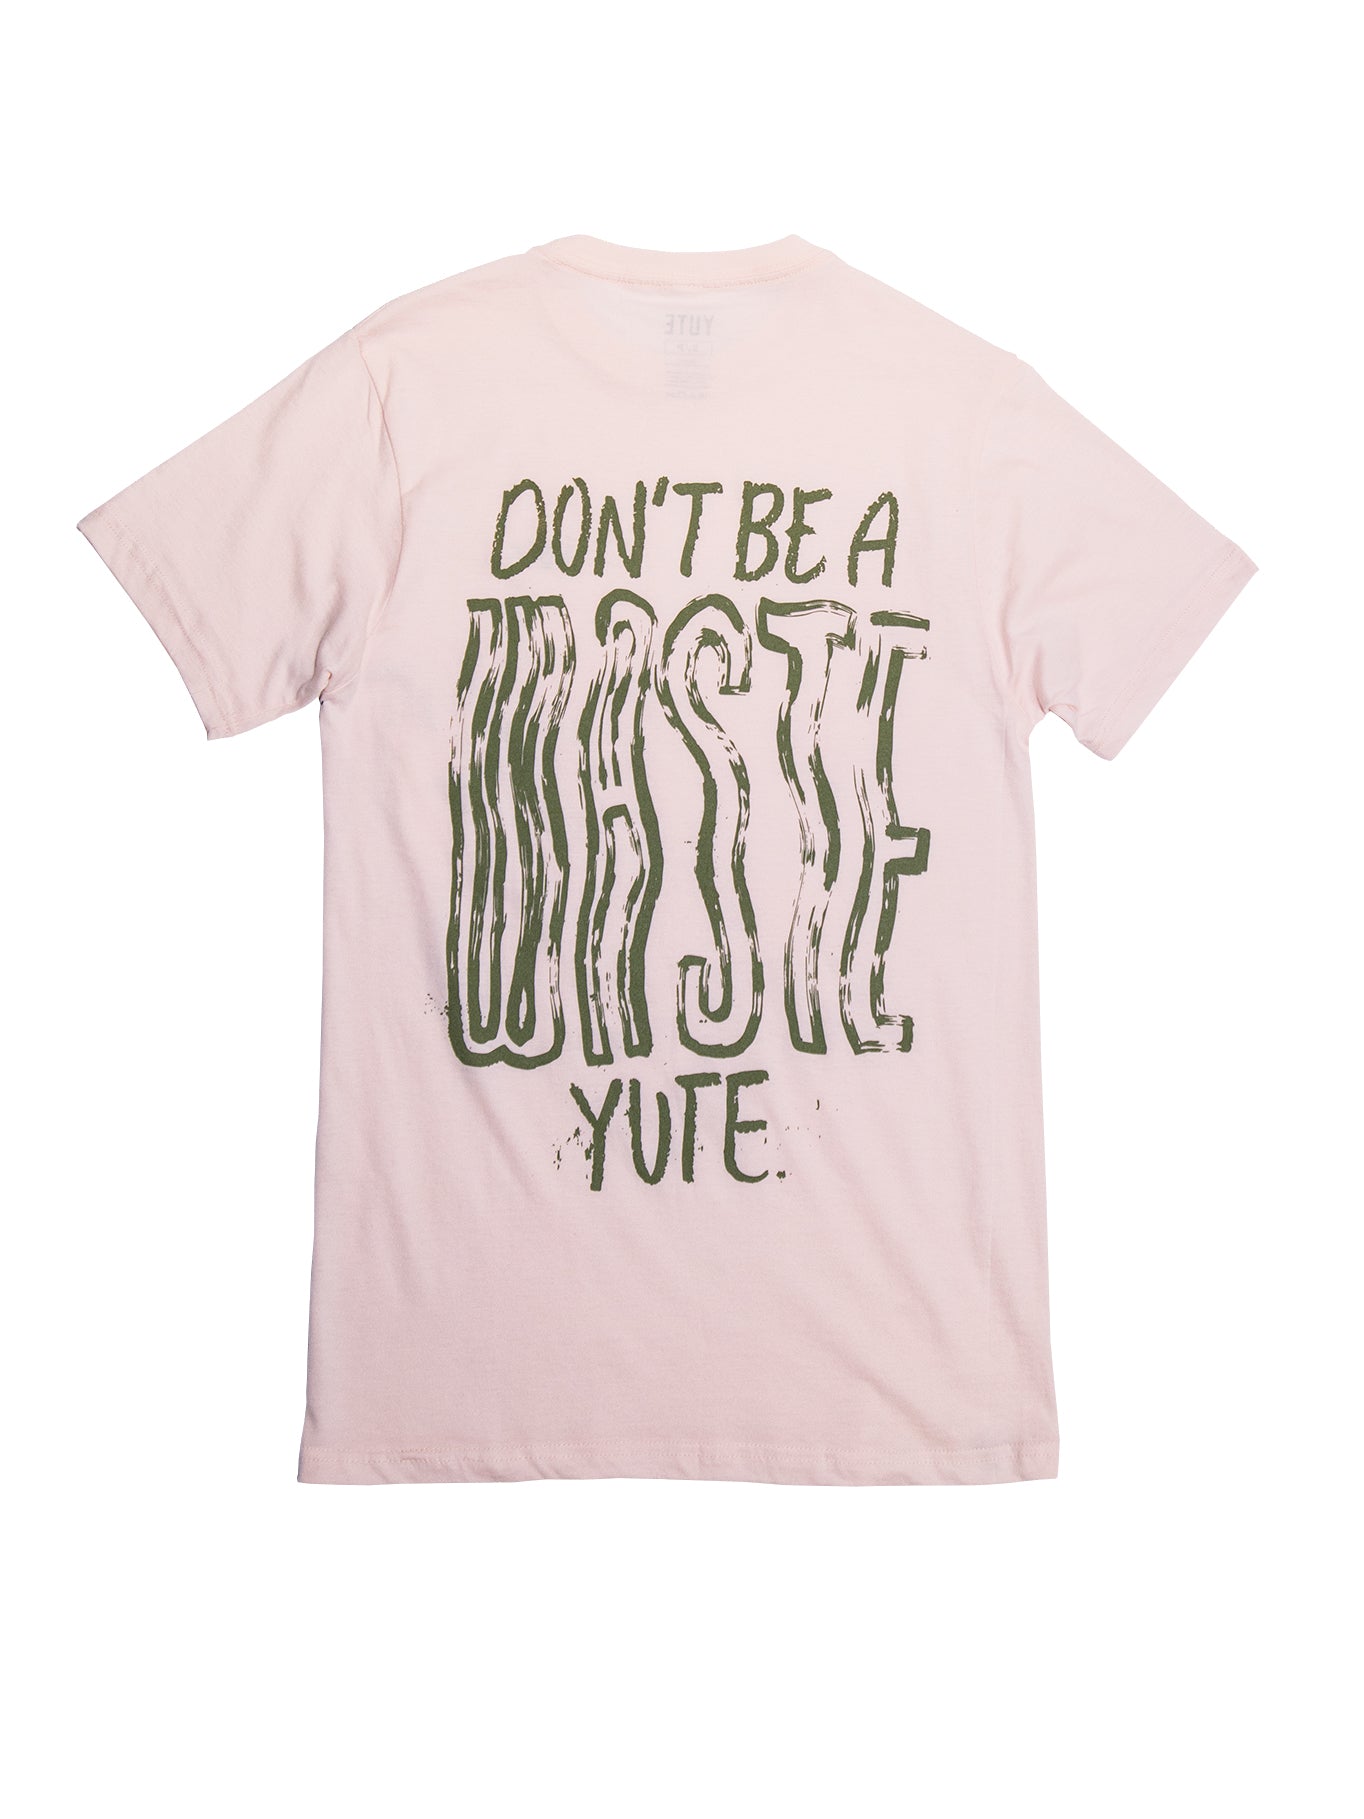 T-Shirt: Don't Be A Waste YUTE (pink)